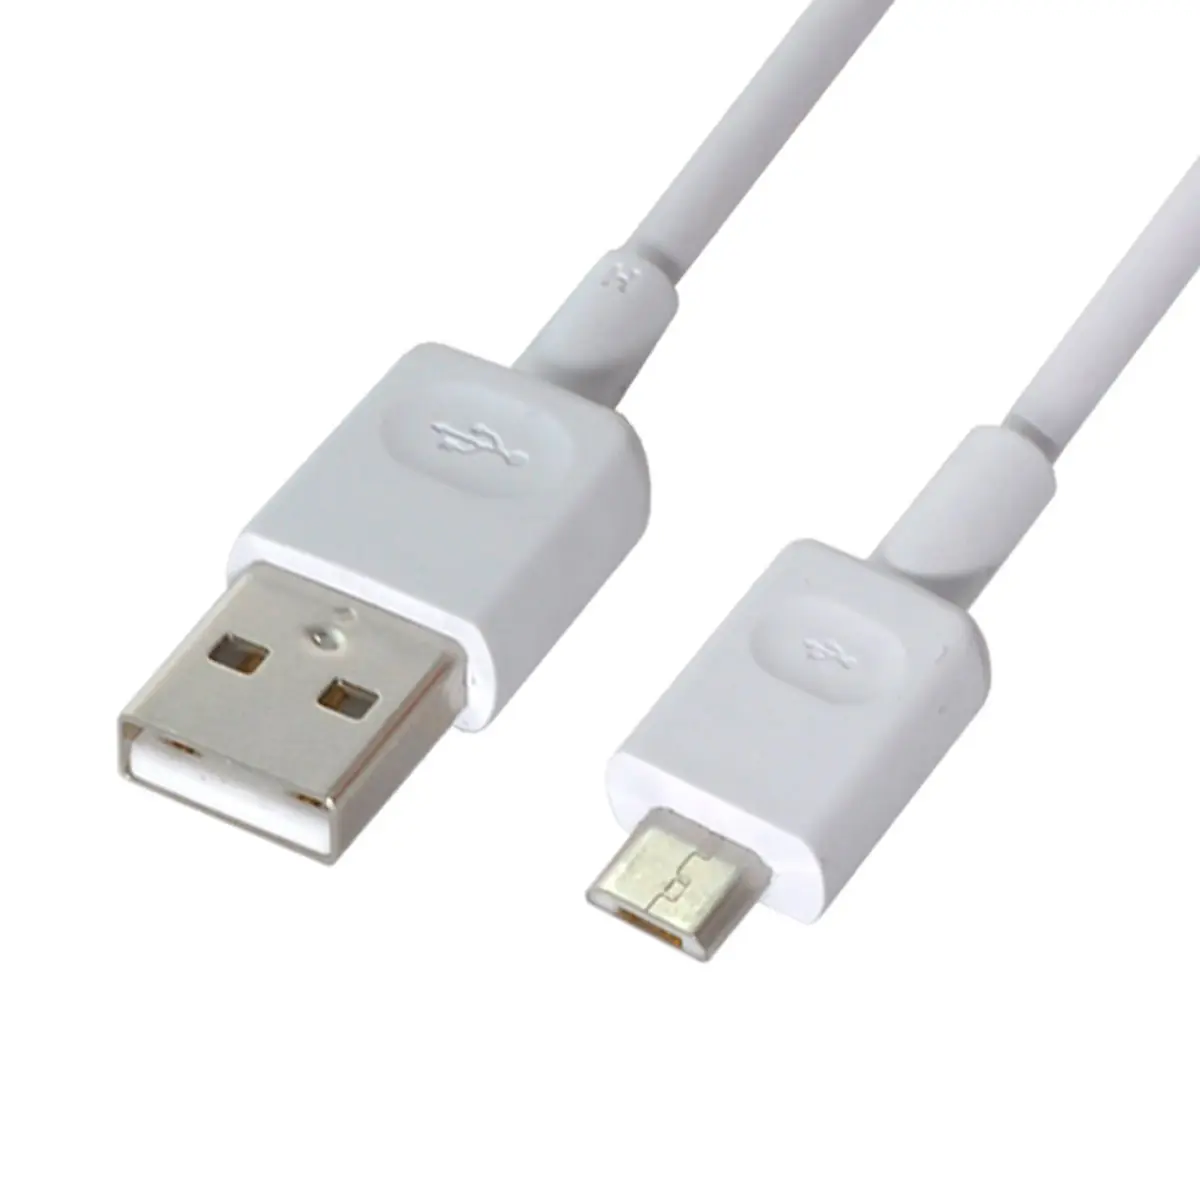 

CY White Micro USB 5Pin to USB 2.0 Male Data Cable 100cm for Tablet & Cell Phone & Camera